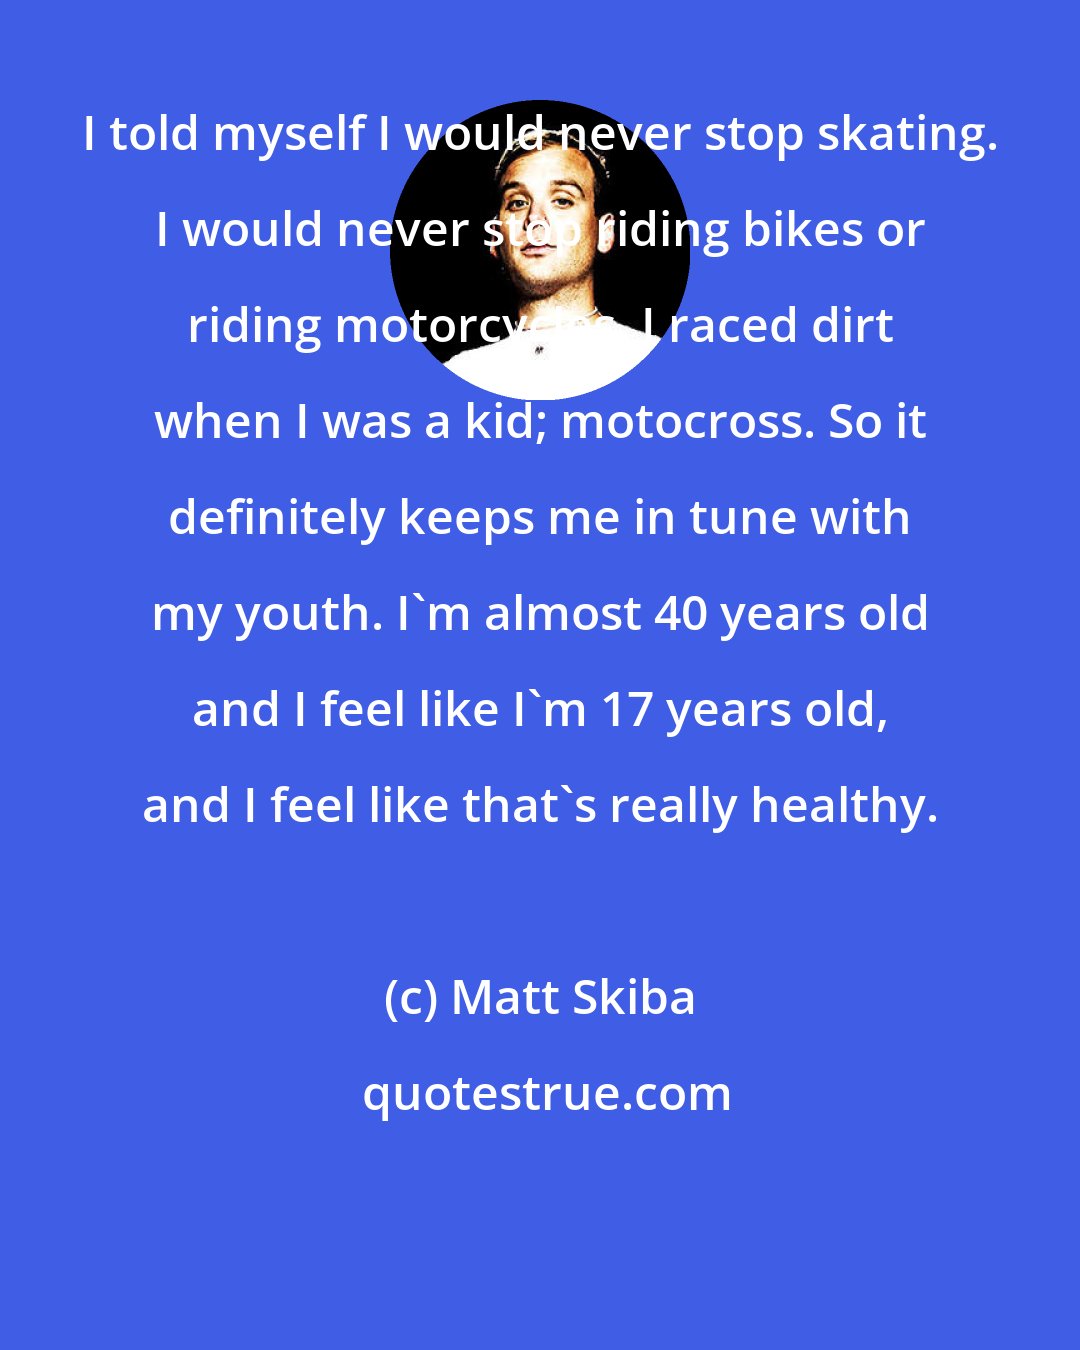 Matt Skiba: I told myself I would never stop skating. I would never stop riding bikes or riding motorcycles. I raced dirt when I was a kid; motocross. So it definitely keeps me in tune with my youth. I'm almost 40 years old and I feel like I'm 17 years old, and I feel like that's really healthy.